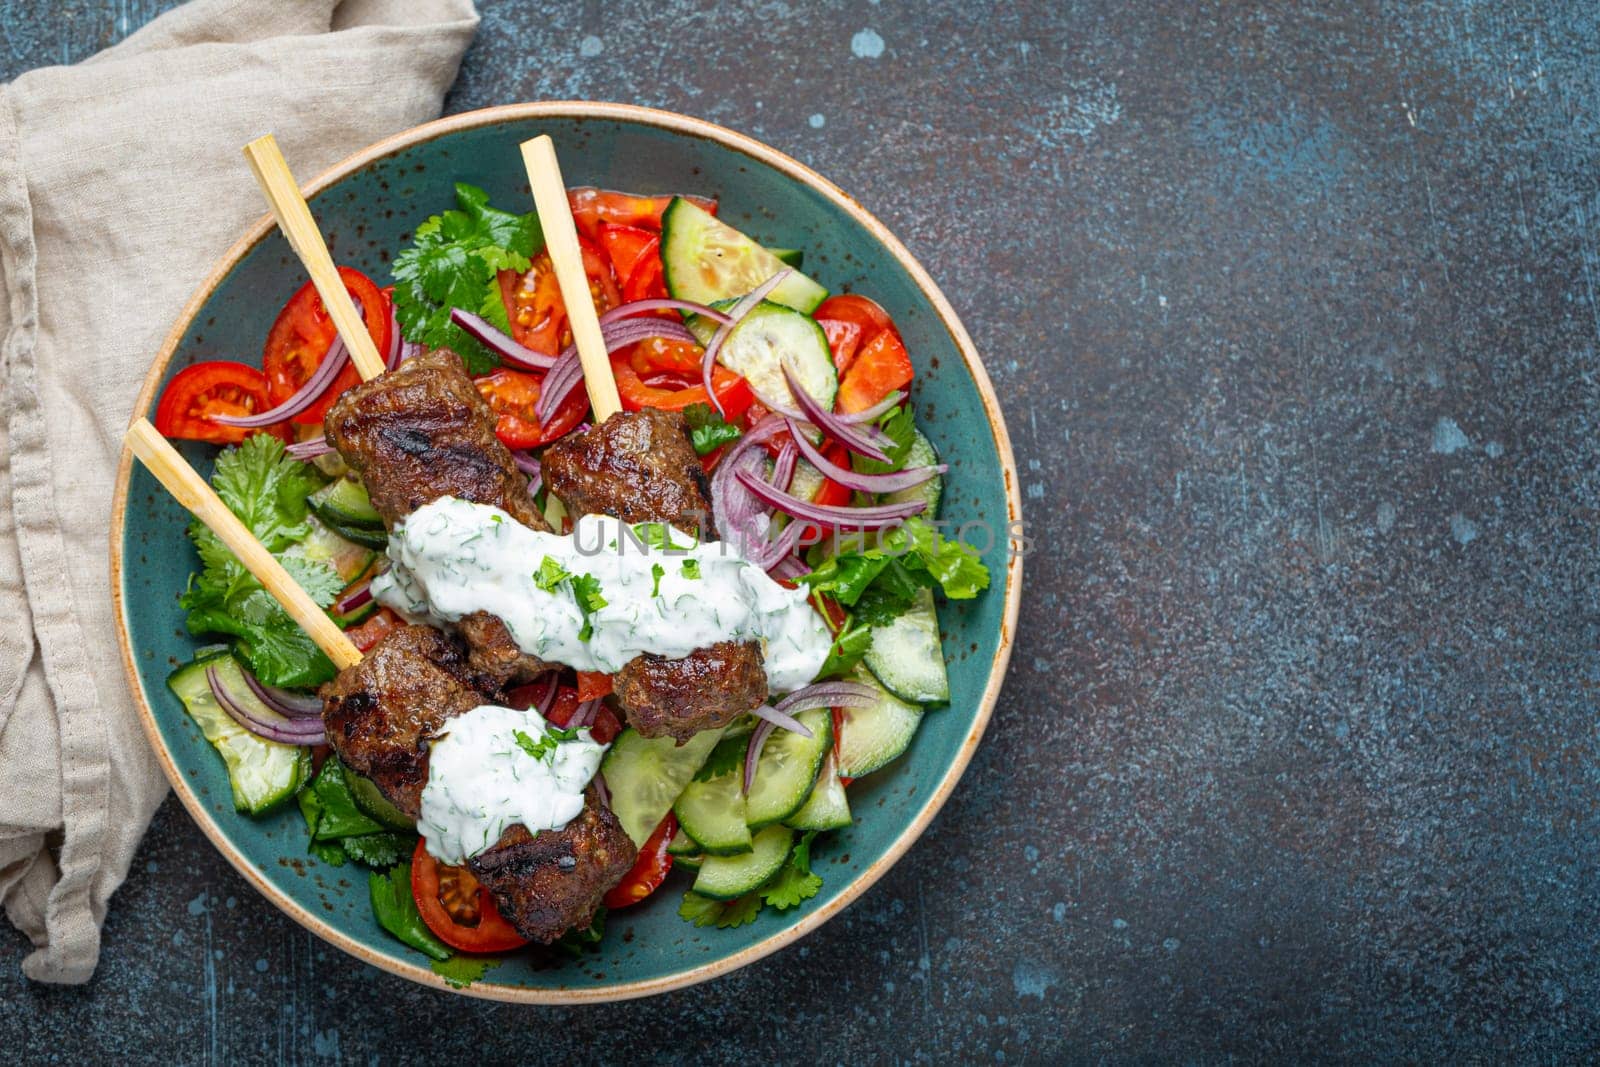 Grilled skewer meat beef kebabs on sticks served with fresh vegetables salad on plate on rustic concrete background from above. Traditional Middle Eastern Turkish dish Kebab, space for text by its_al_dente